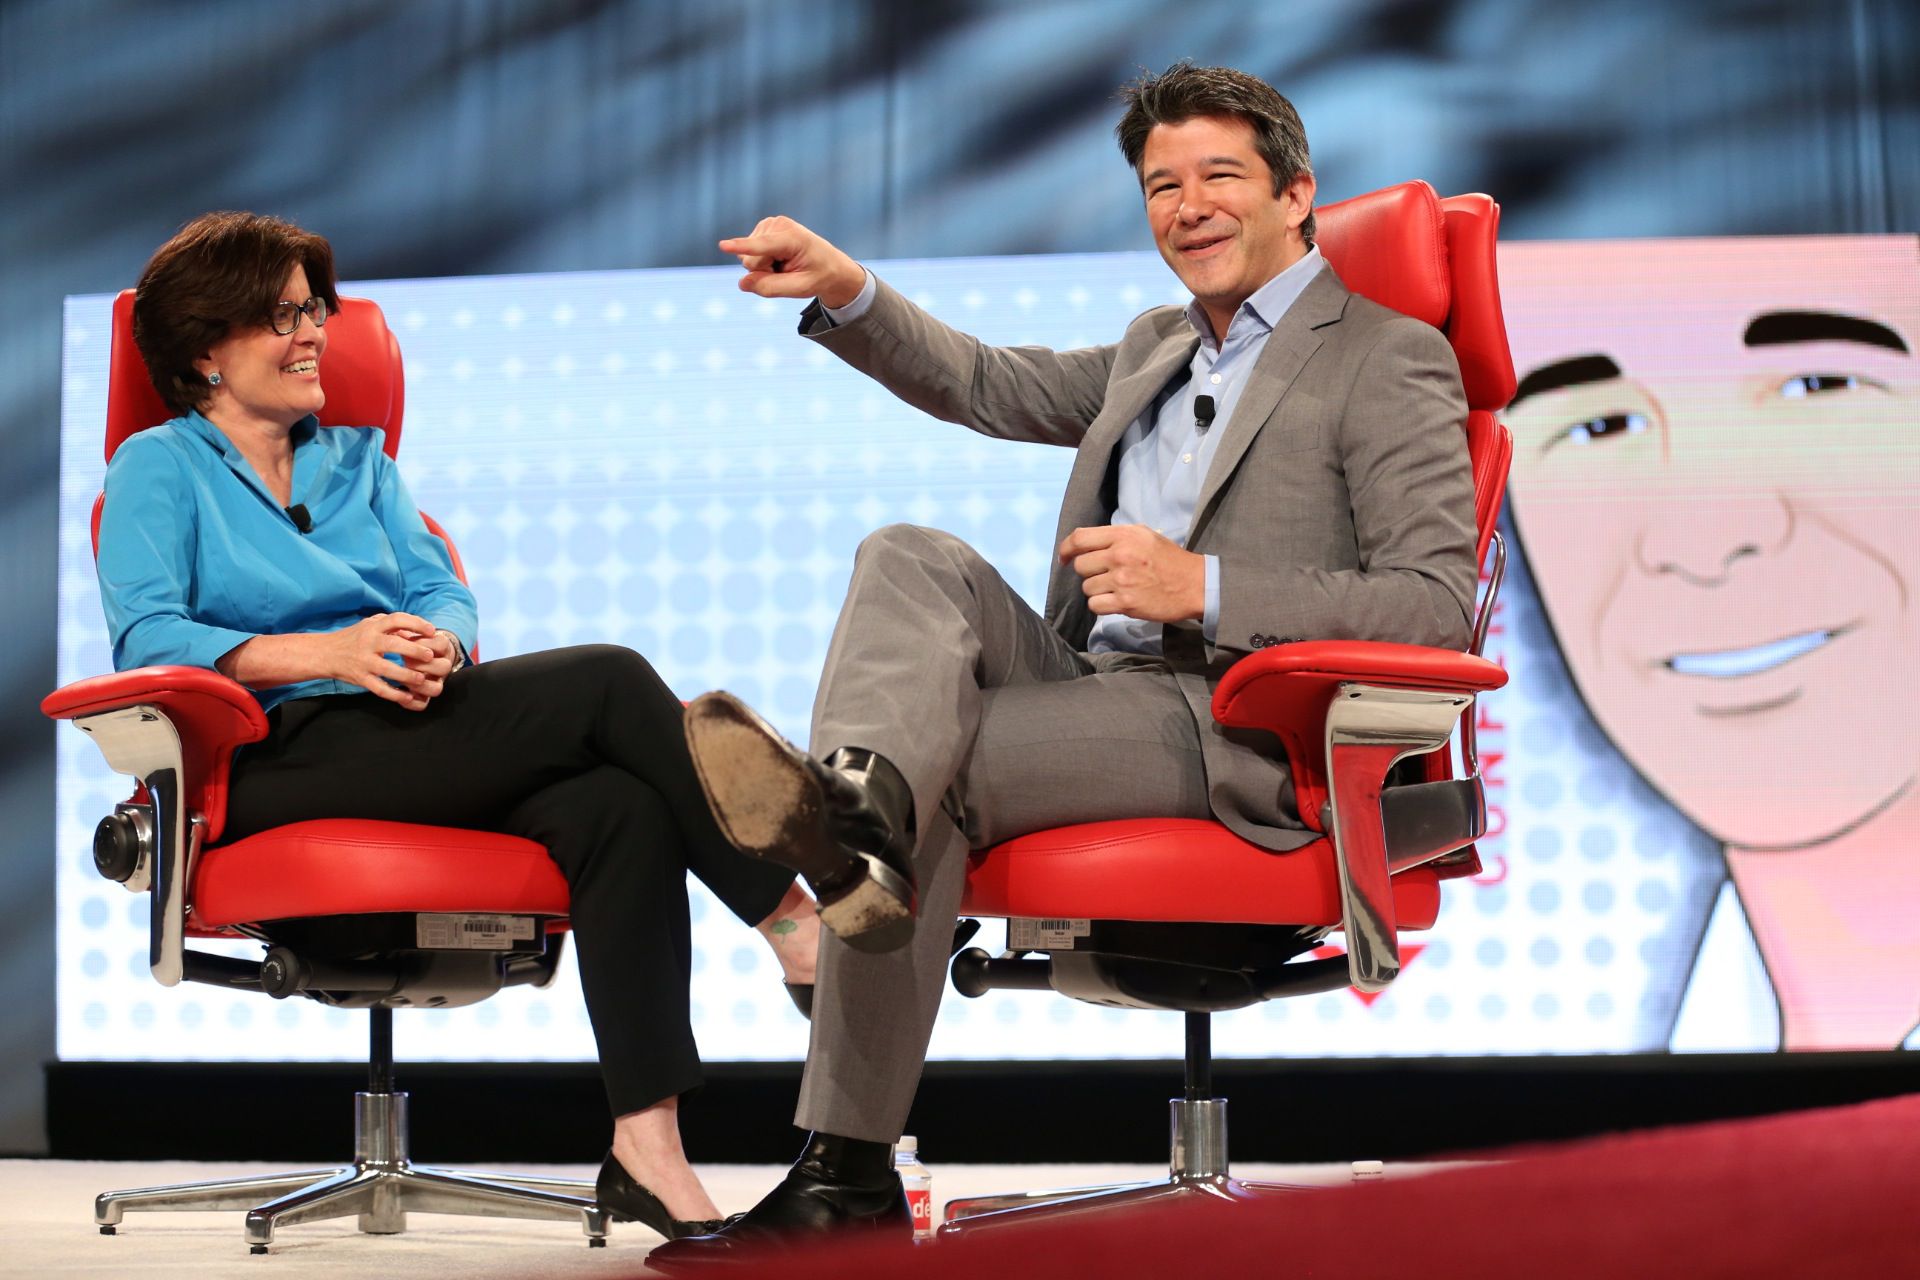 Uber CEO Travis Kalanick onstage with Kara Swisher at the Code conference